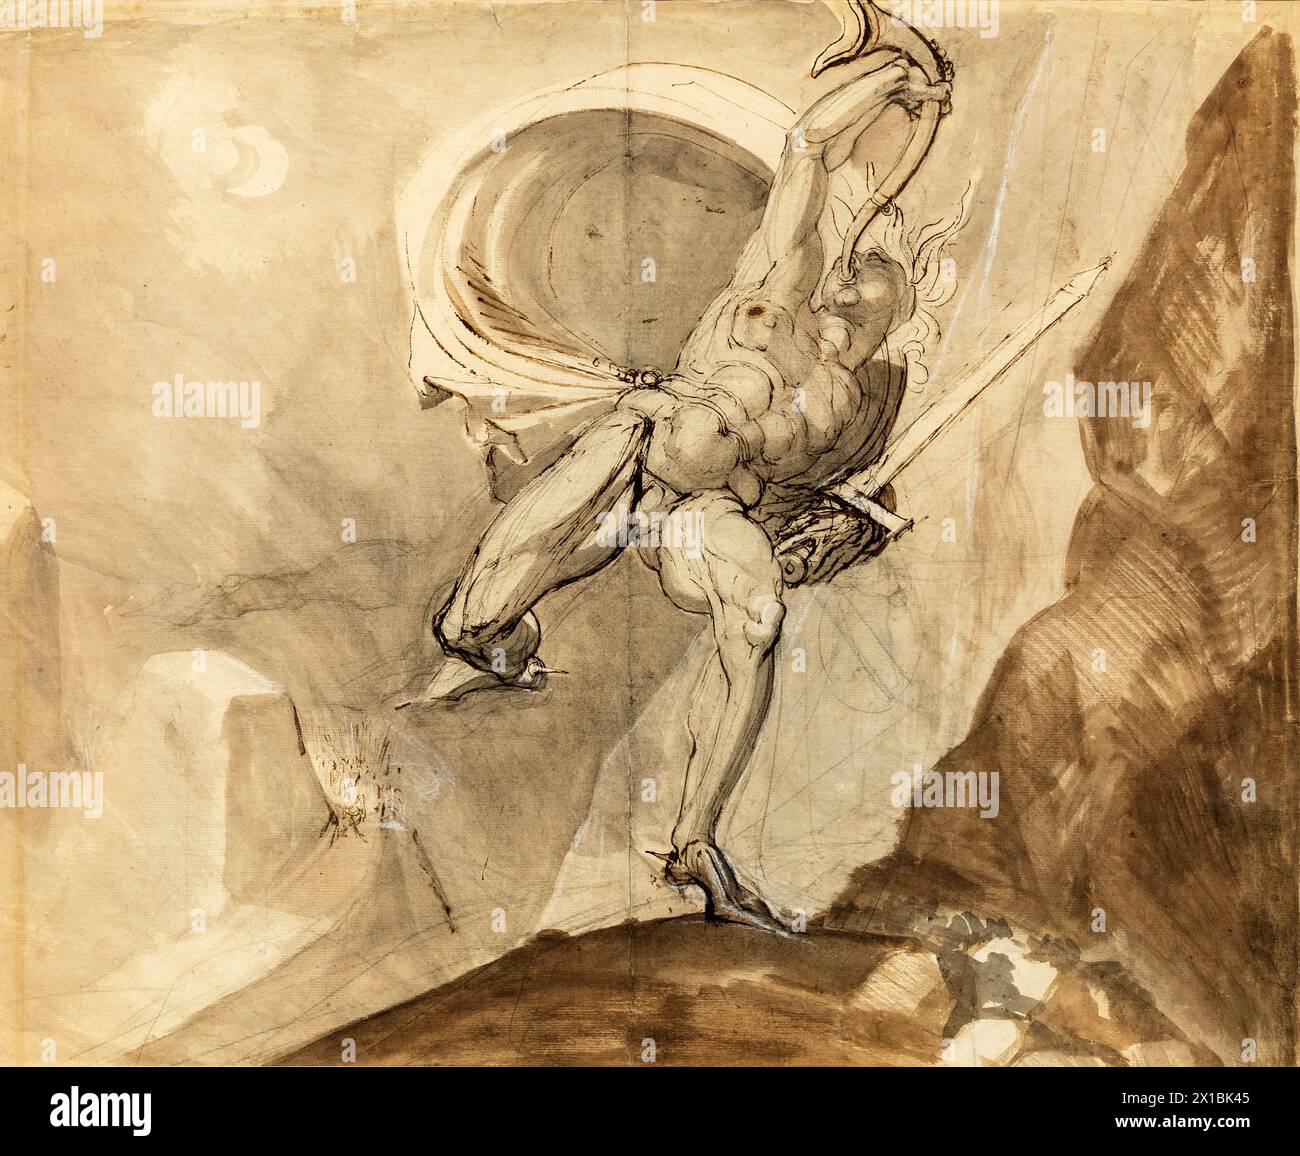 Roland at Roncesvalles.  Henry Fuseli. ca. Between 1800 and 1810. Stock Photo